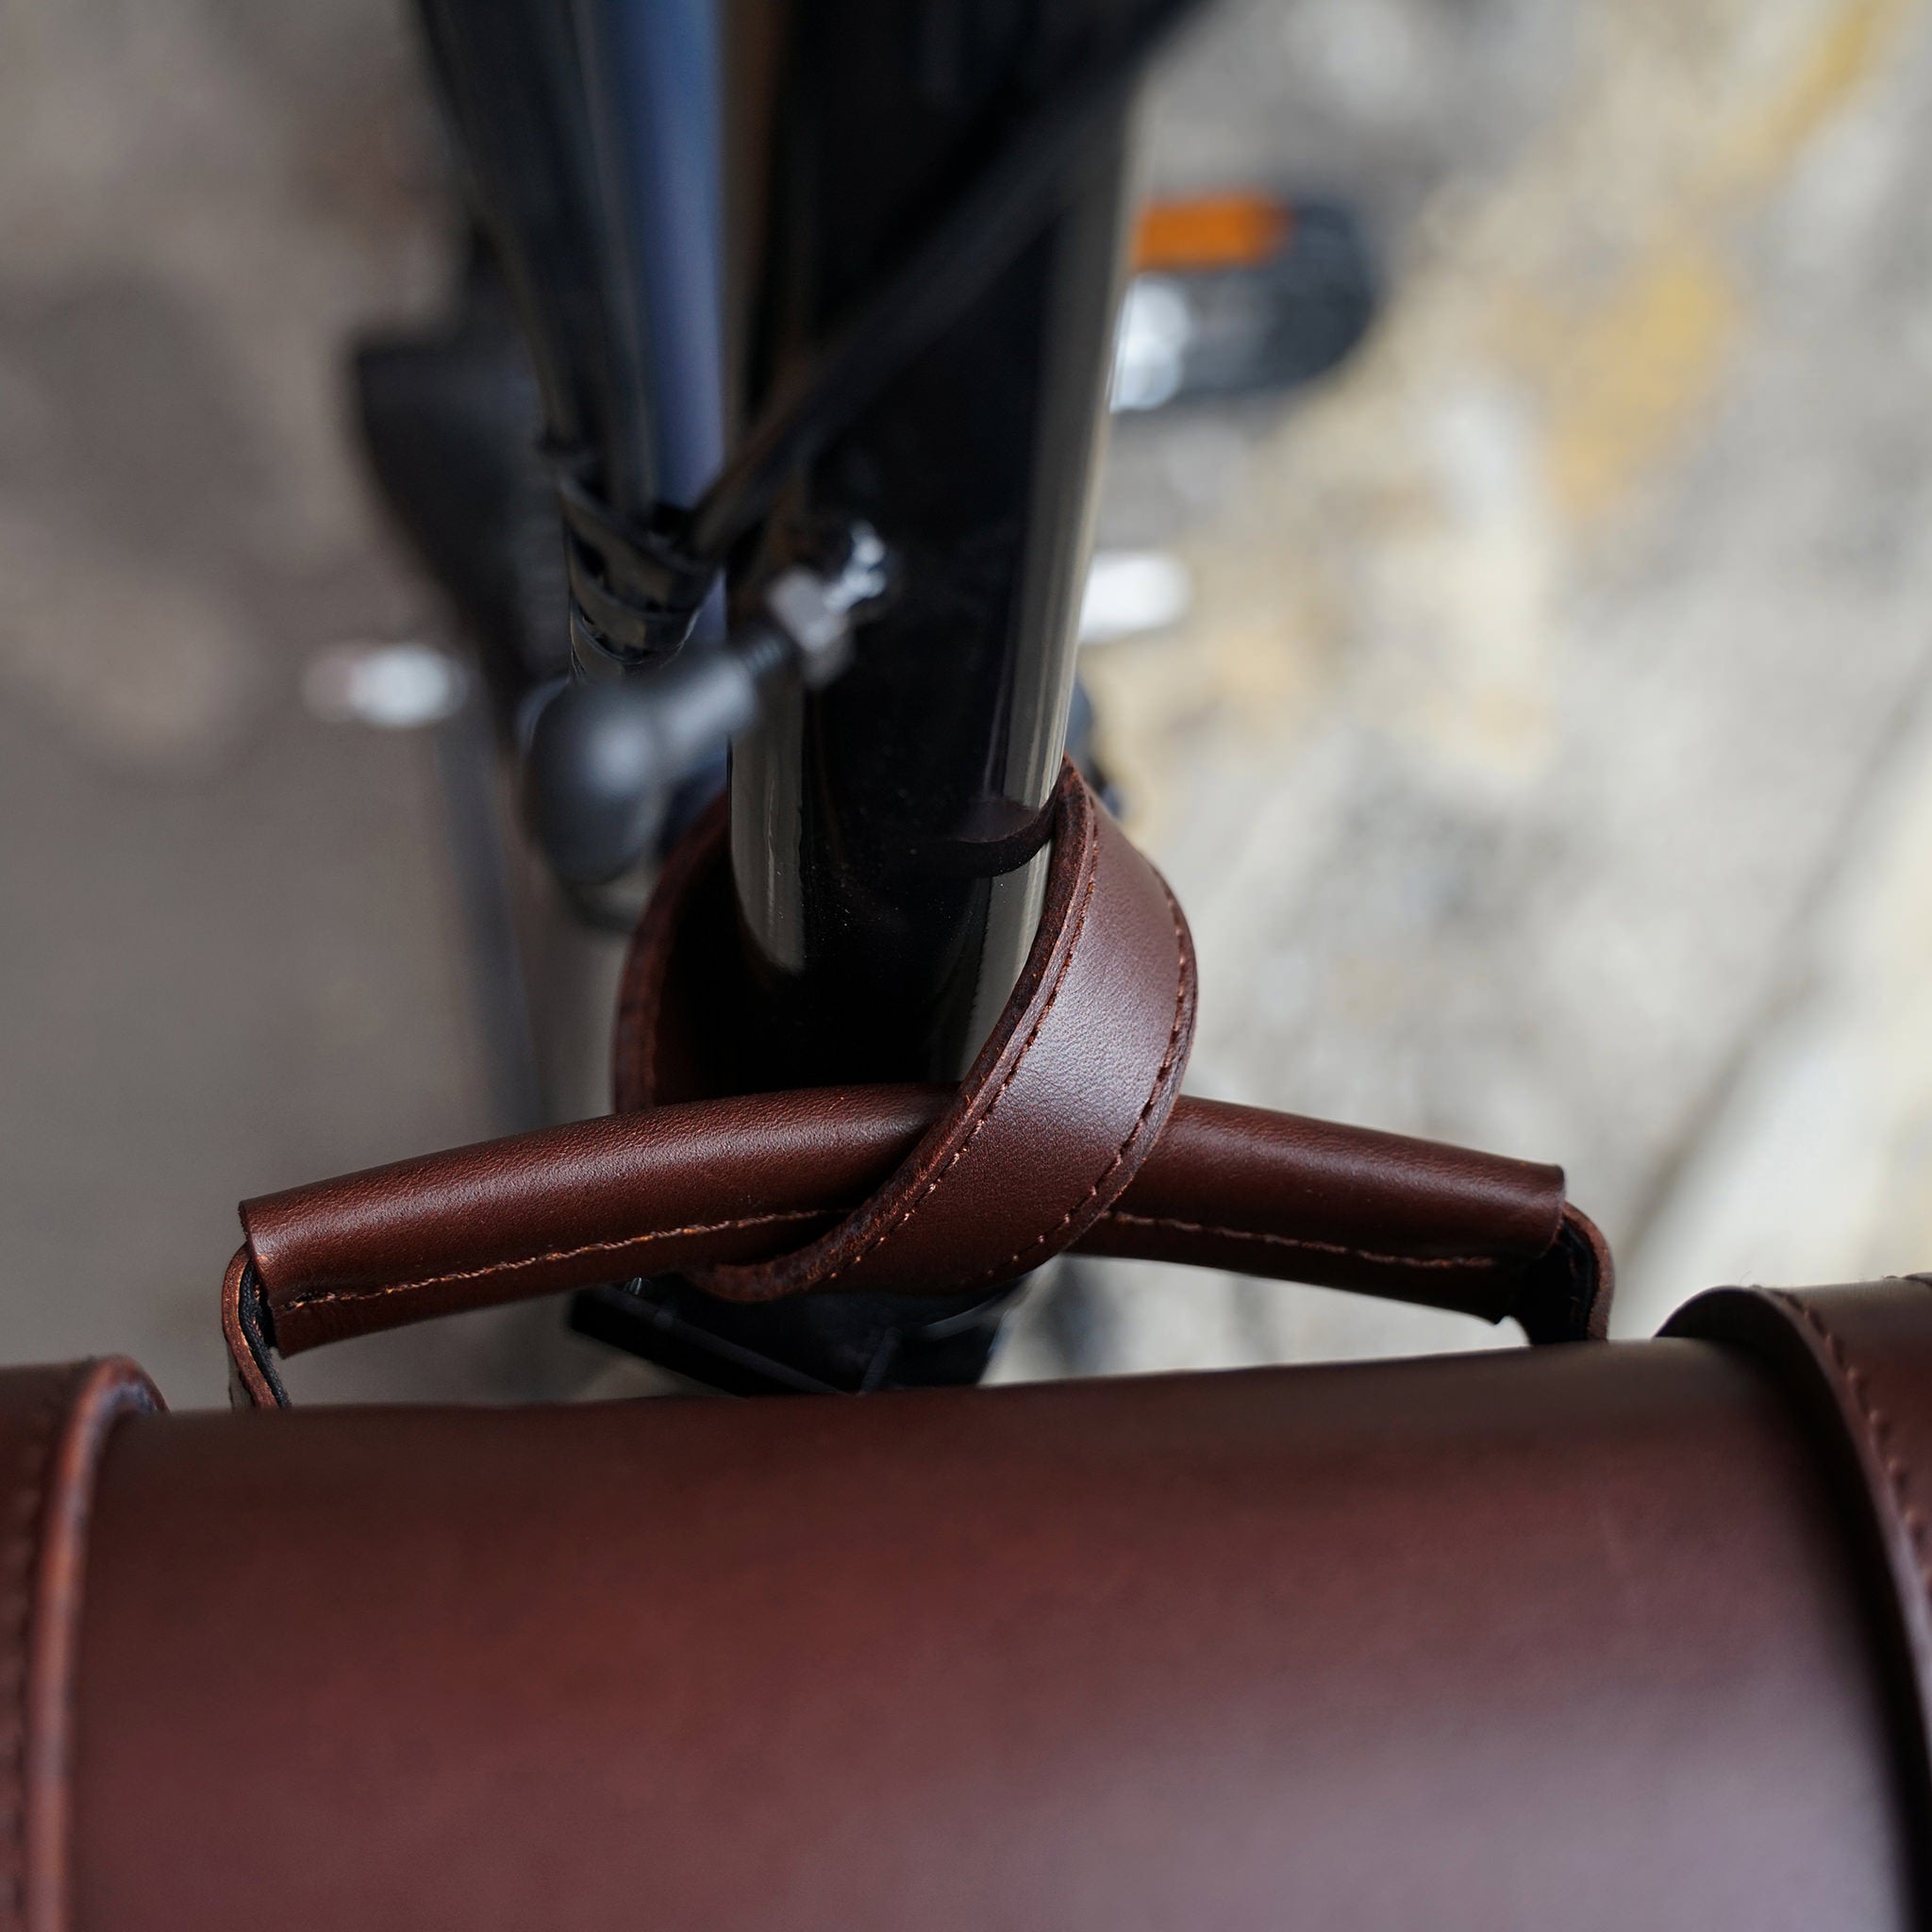 A strap is used to tie the bag/s handle or body strap to your bike.